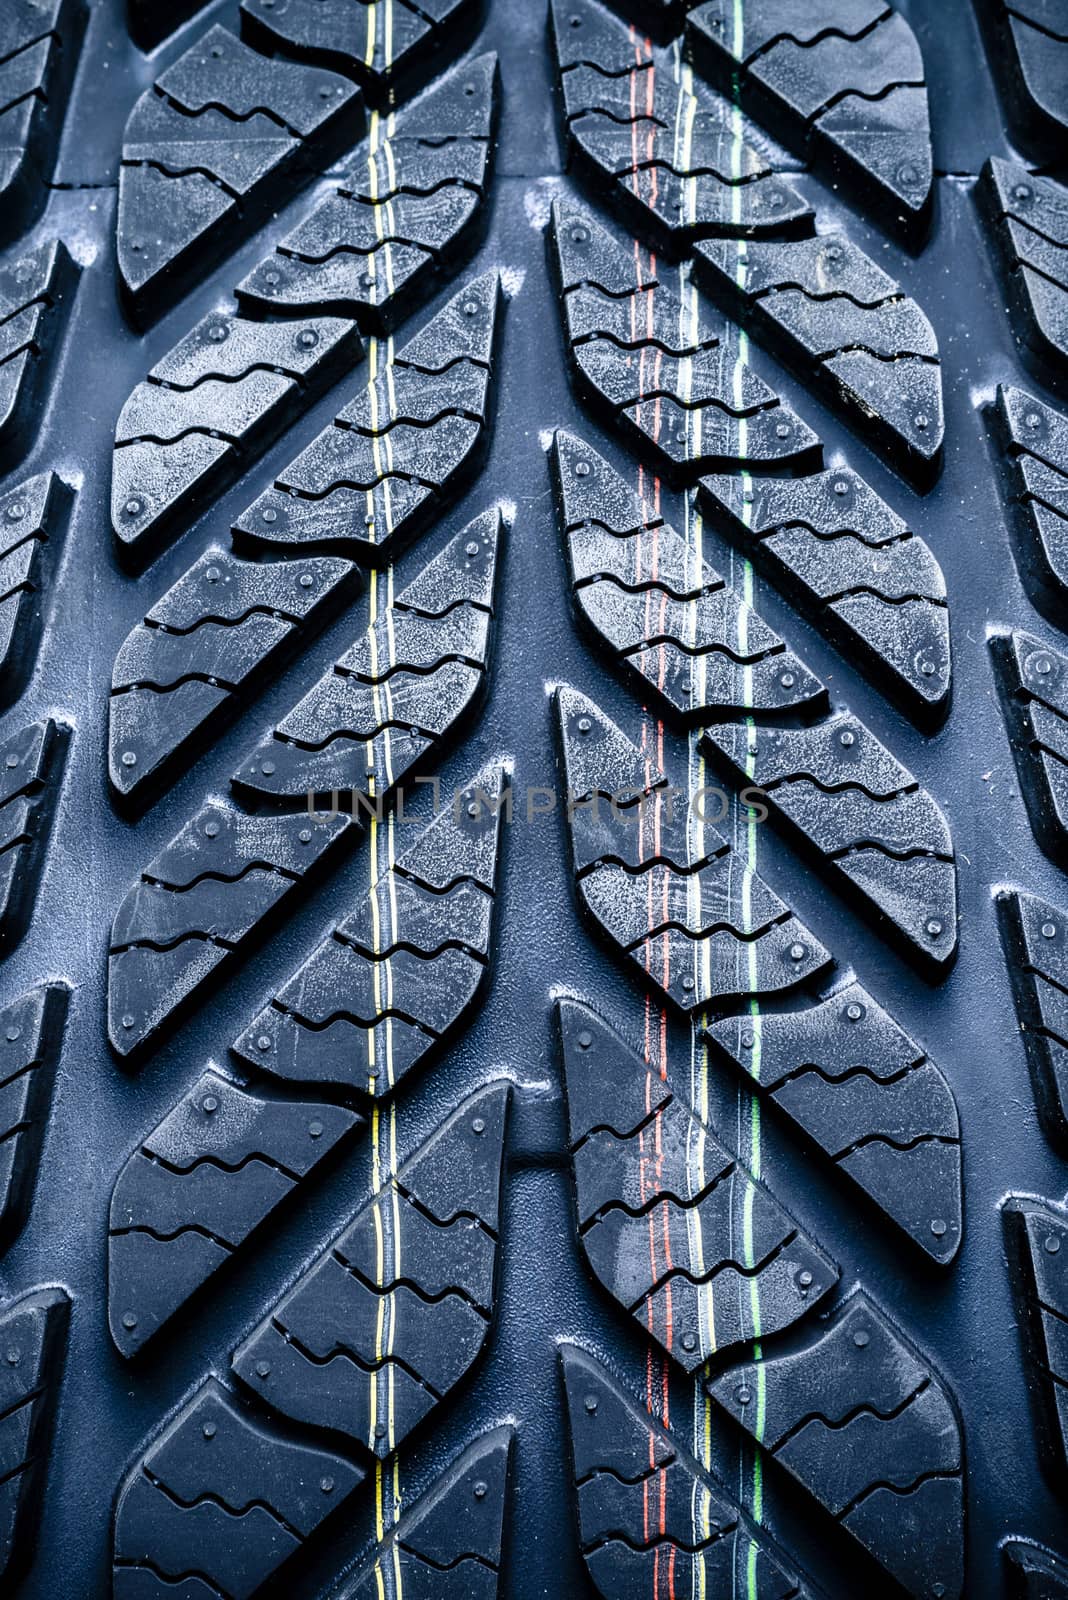 Fragment of new vehicle or car tyre, tire with visible tread and colour mark.